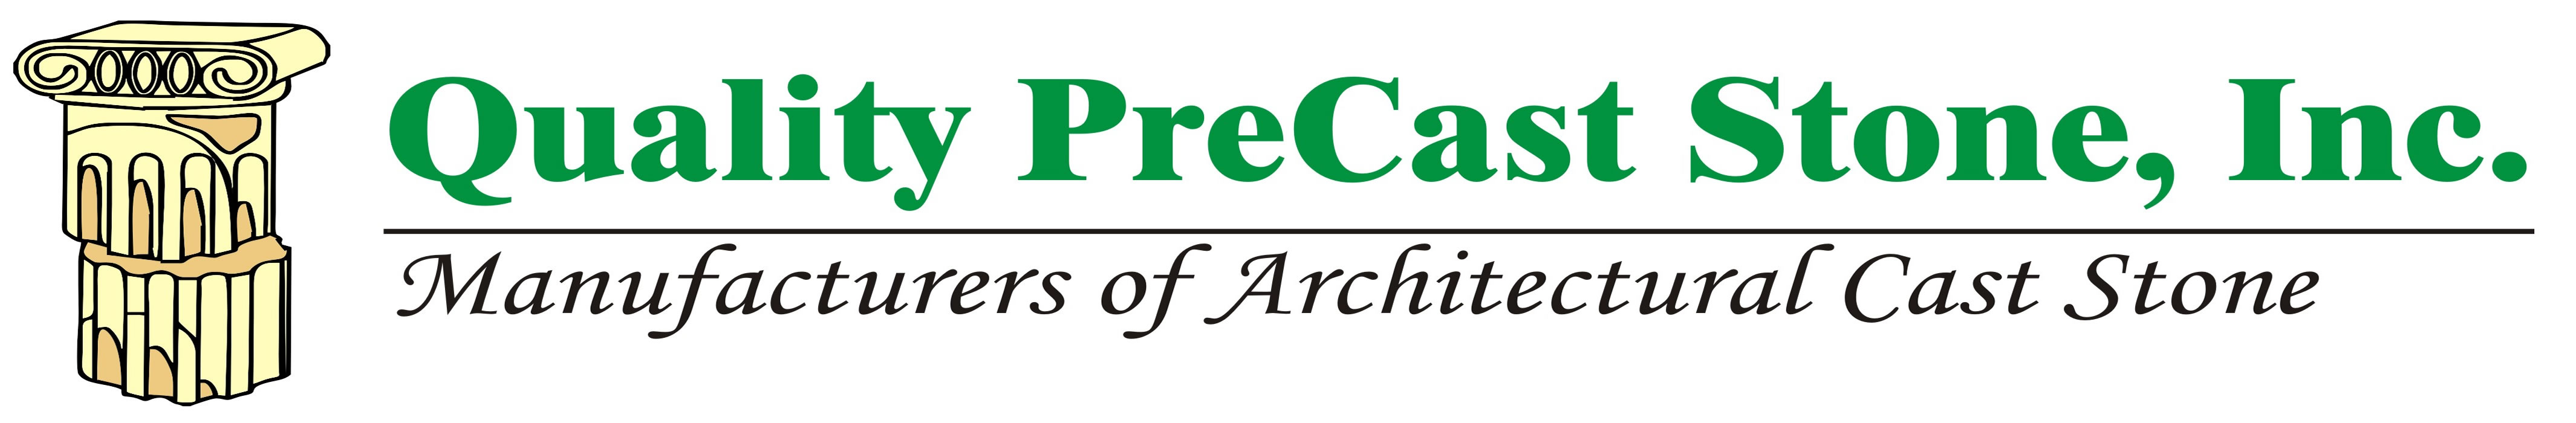 Quality Precast Stone, Manufacturers of Architectural Cast Stone